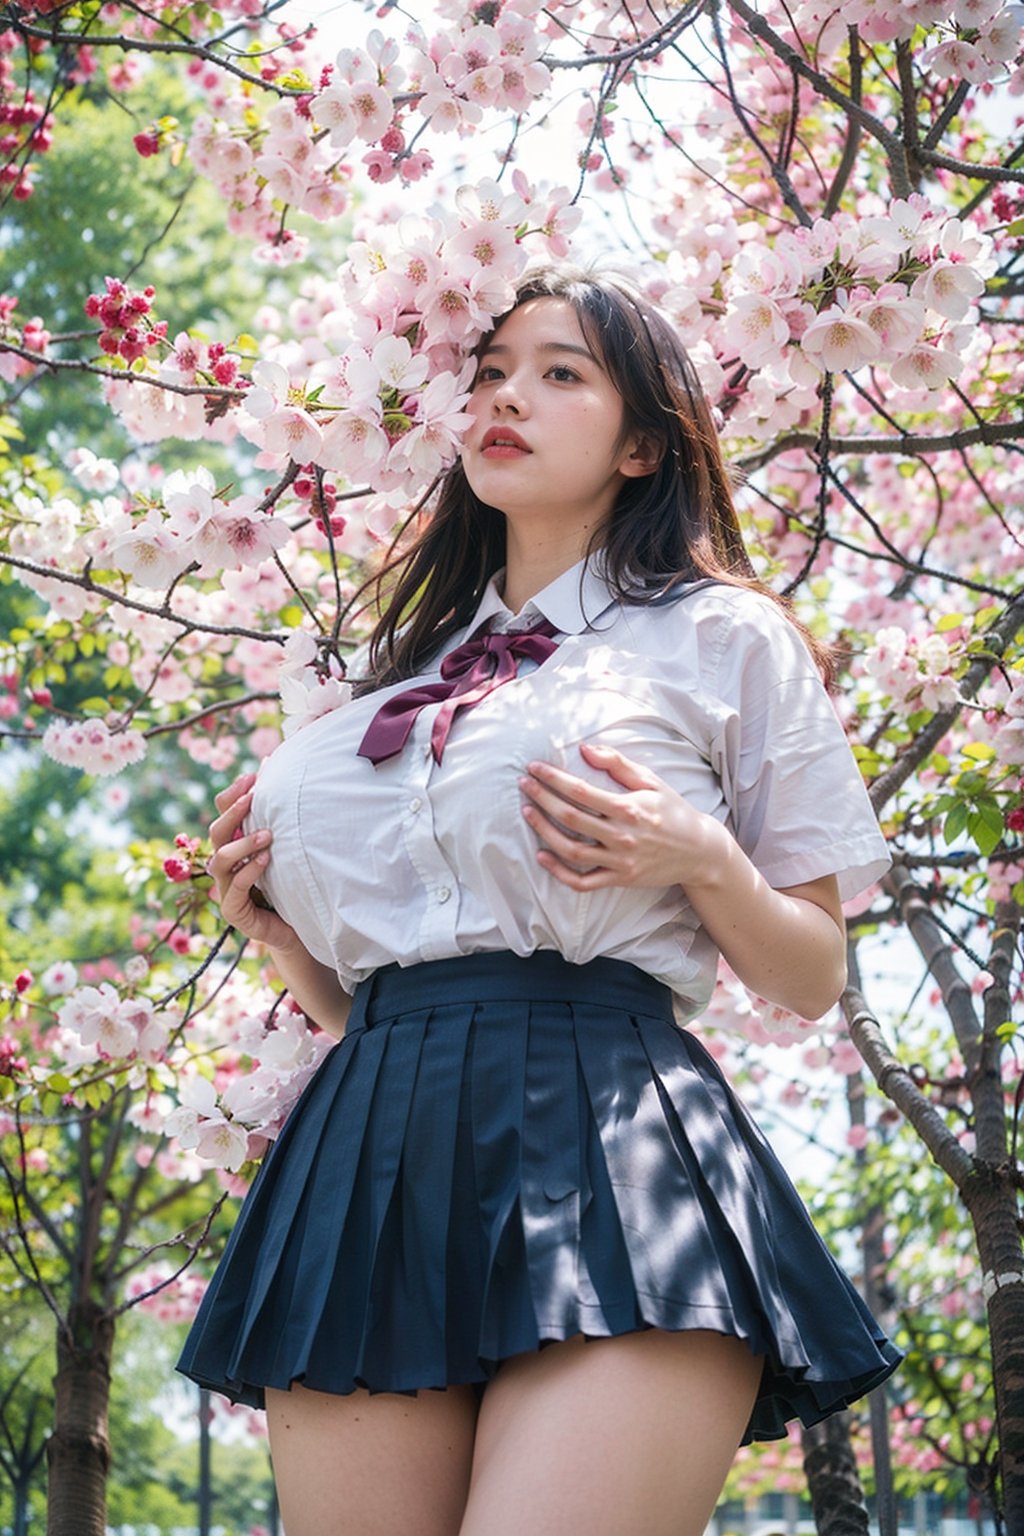 masterpiece,  highest quality,  8K,  RAW photo,
BREAK
1 japanese girl, high school student, school uniform, big breast, (haircut of uniform length), (one length), Beautiful shiny black hair, straight hair, messy hair, pale white skin, white skin, full body to the toes,  beautiful thighs, (navy blue pleated skirt), 
BREAK
profile, looking up, close eyes, standing under the cherry trees, ((Cherry blossom storm)), cherry blossom petals are falling, reach out a hand, ((angle from below)), dimly light,  at night, high_school_girl, best quality,CherryBlossom_background